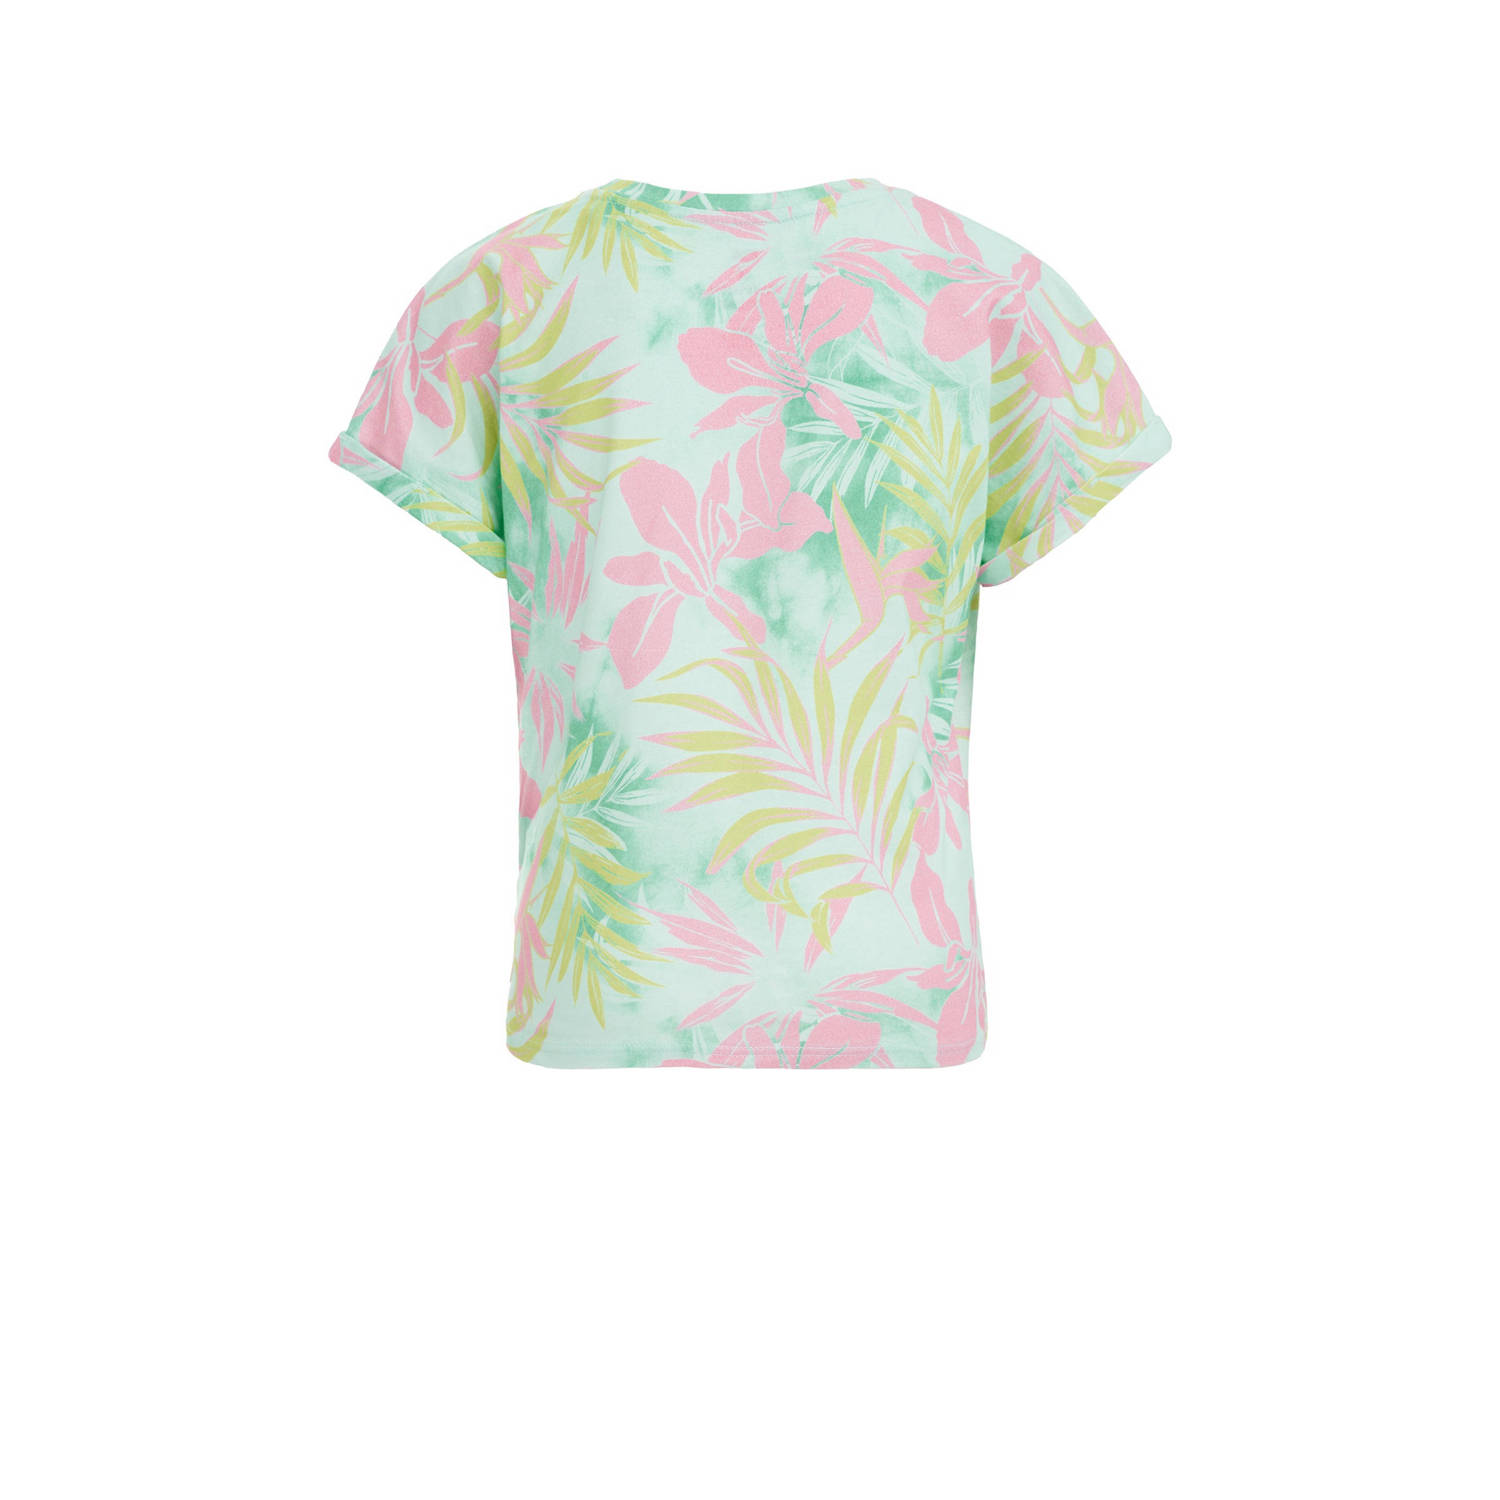 WE Fashion T-shirt met all over print wit groen roze